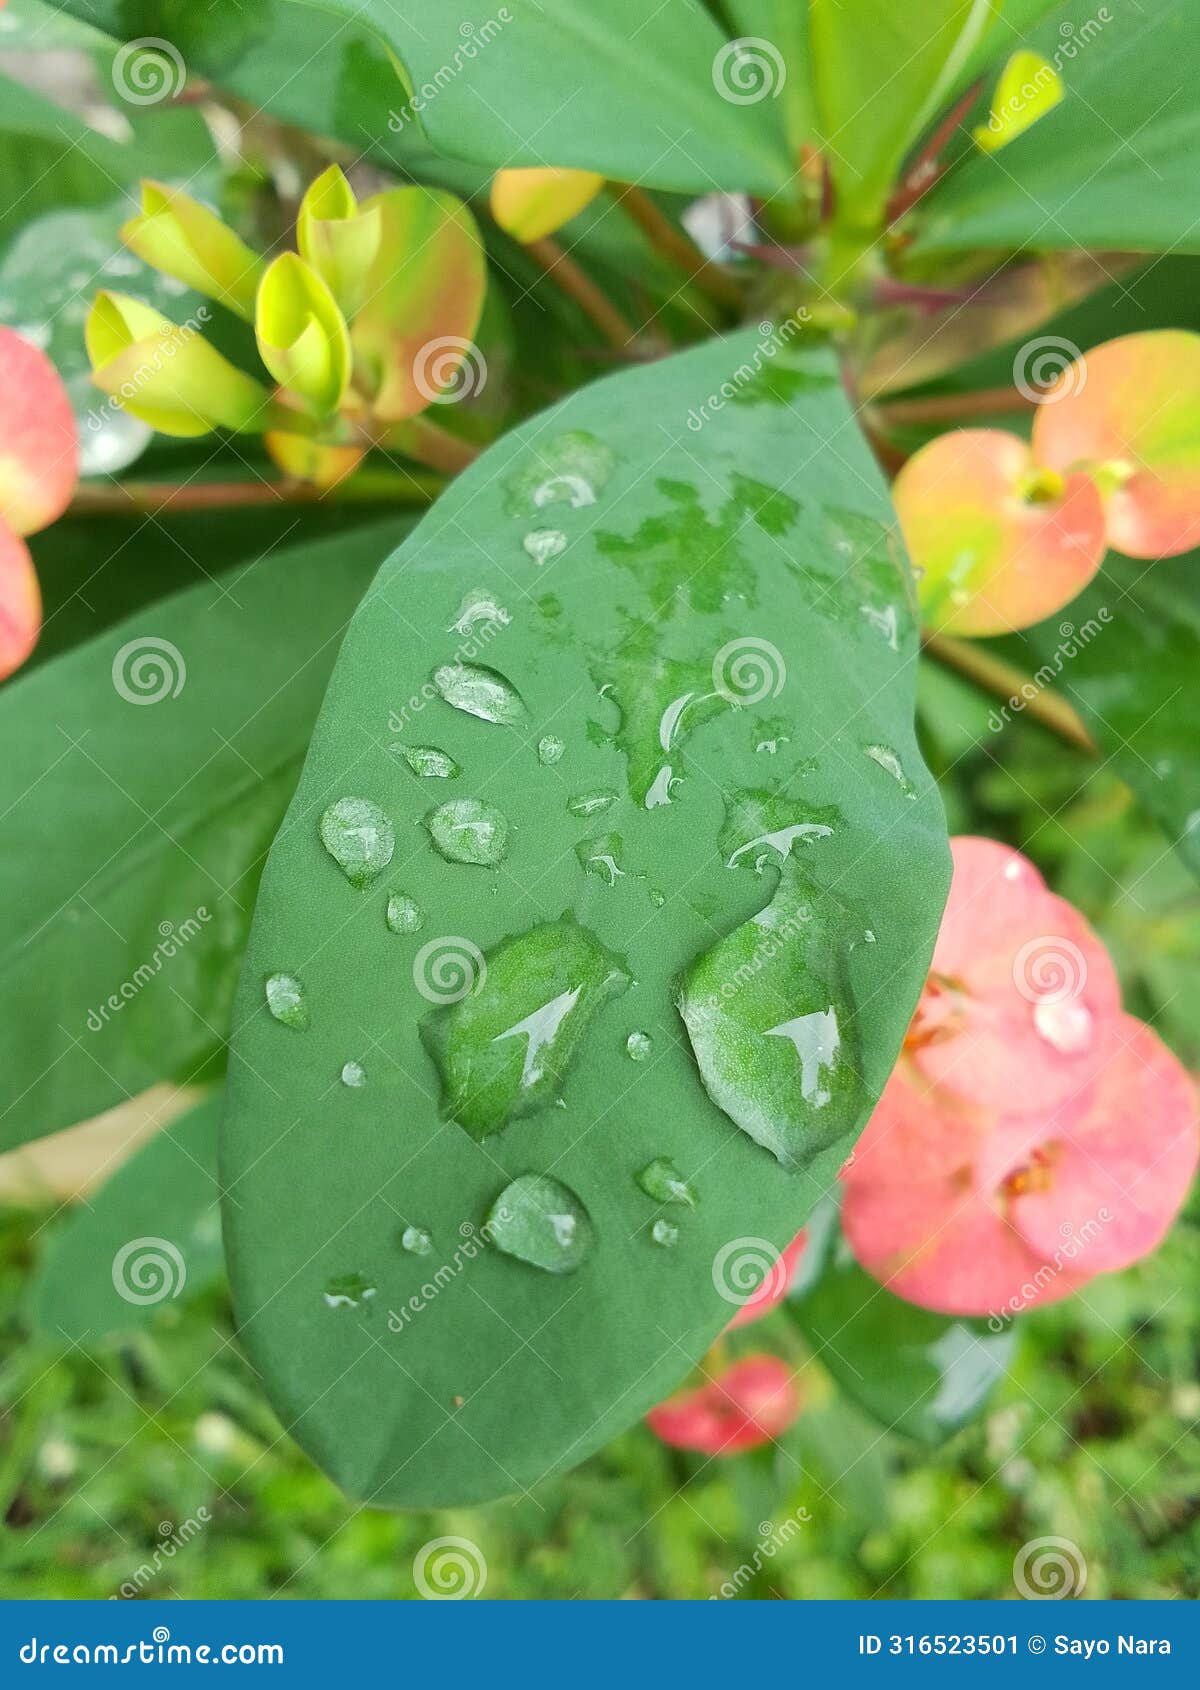 traces of water droplets on leaves that have just been watered